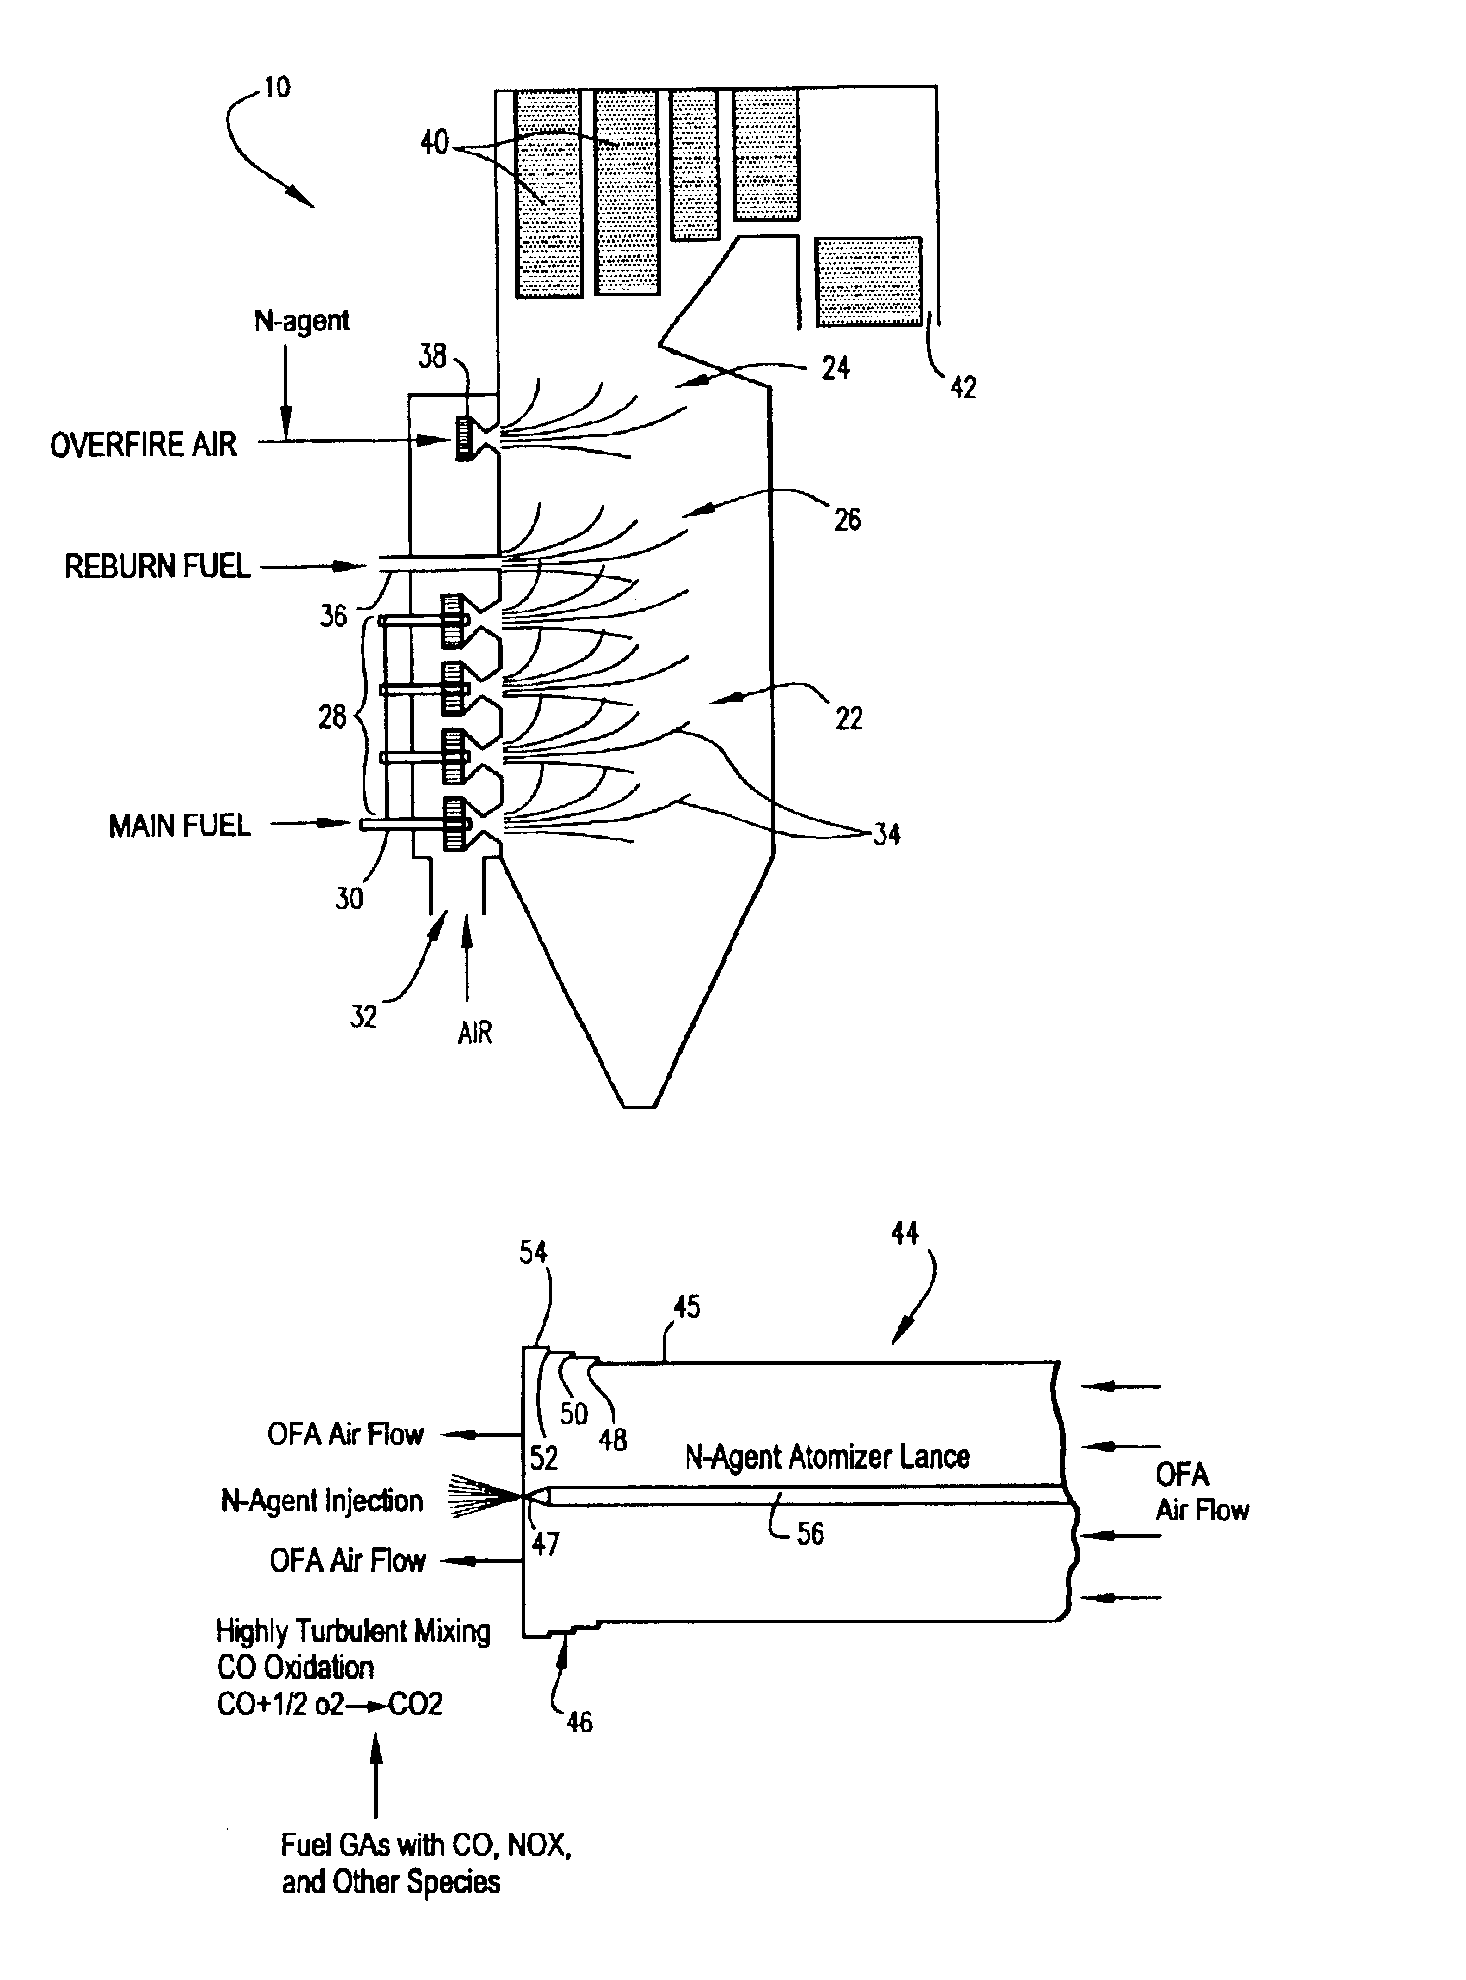 Step-diffuser for overfire air and overfire air/N-agent injector systems